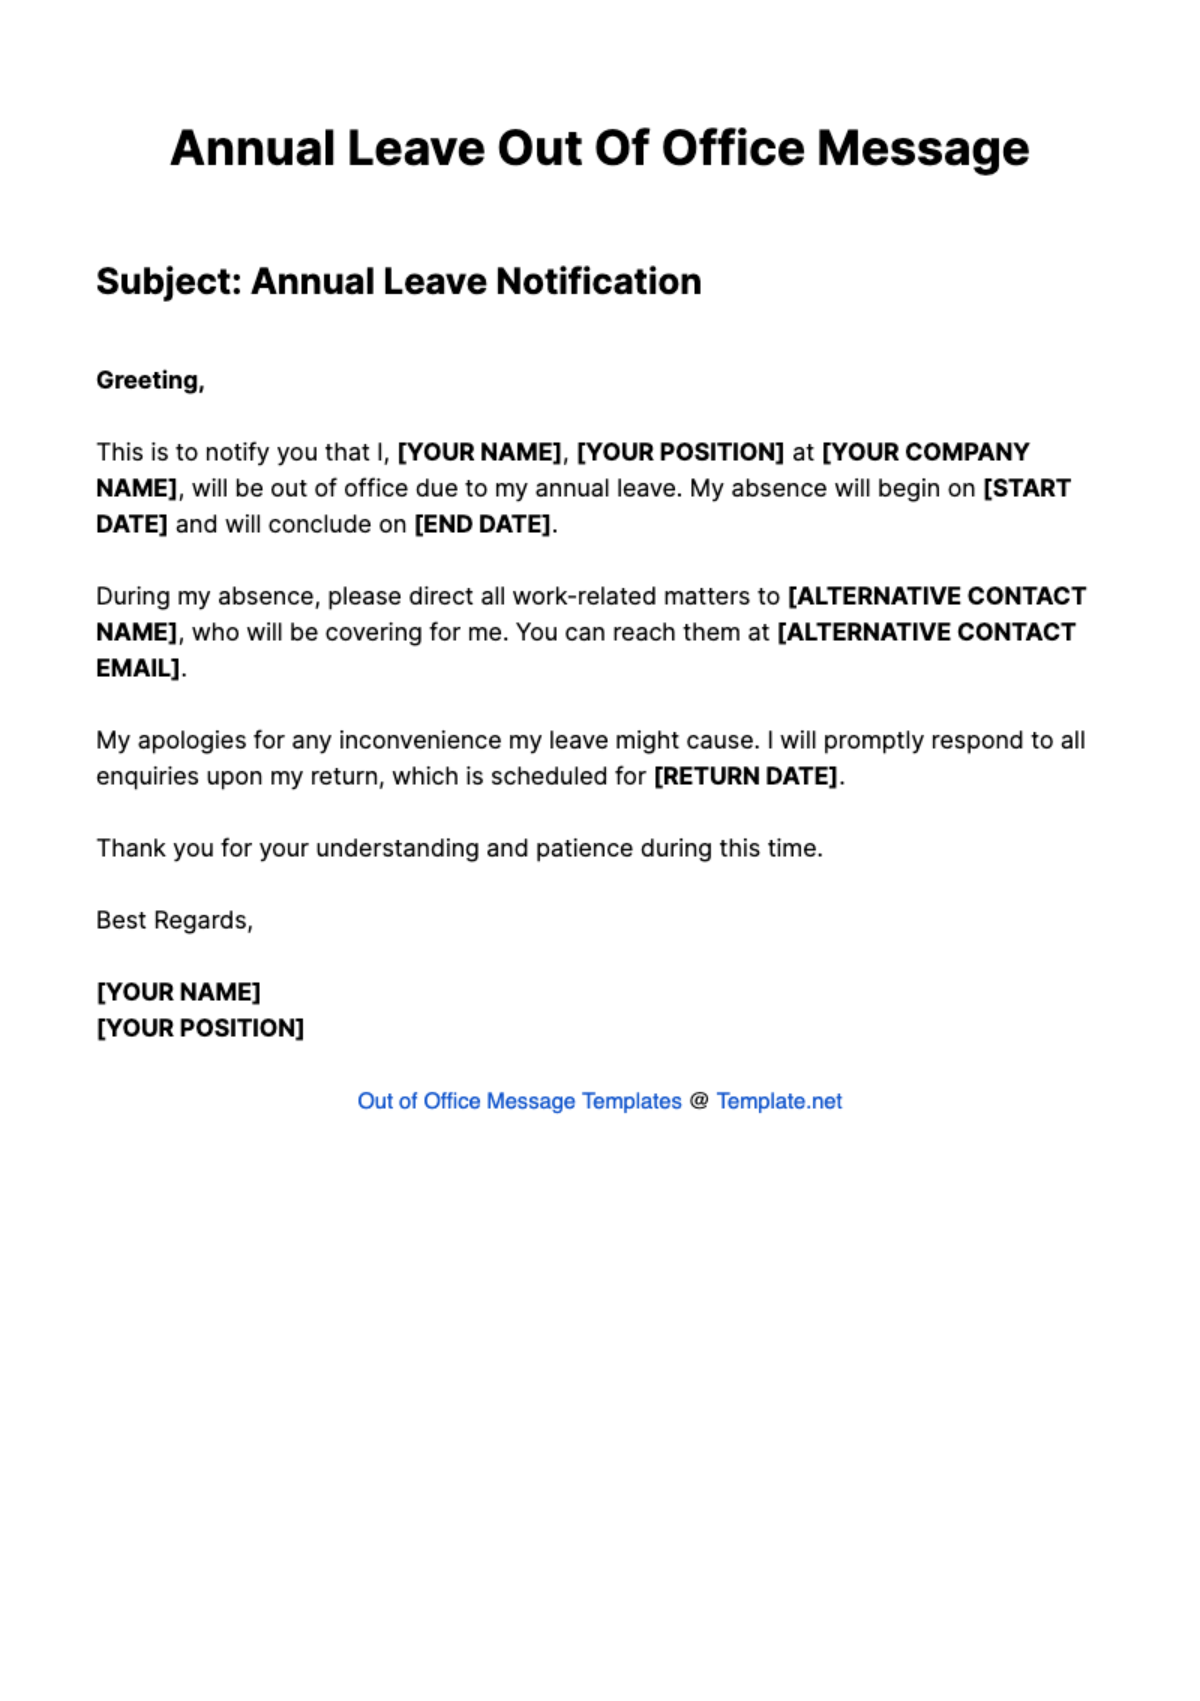 Annual Leave Out Of Office Message Template